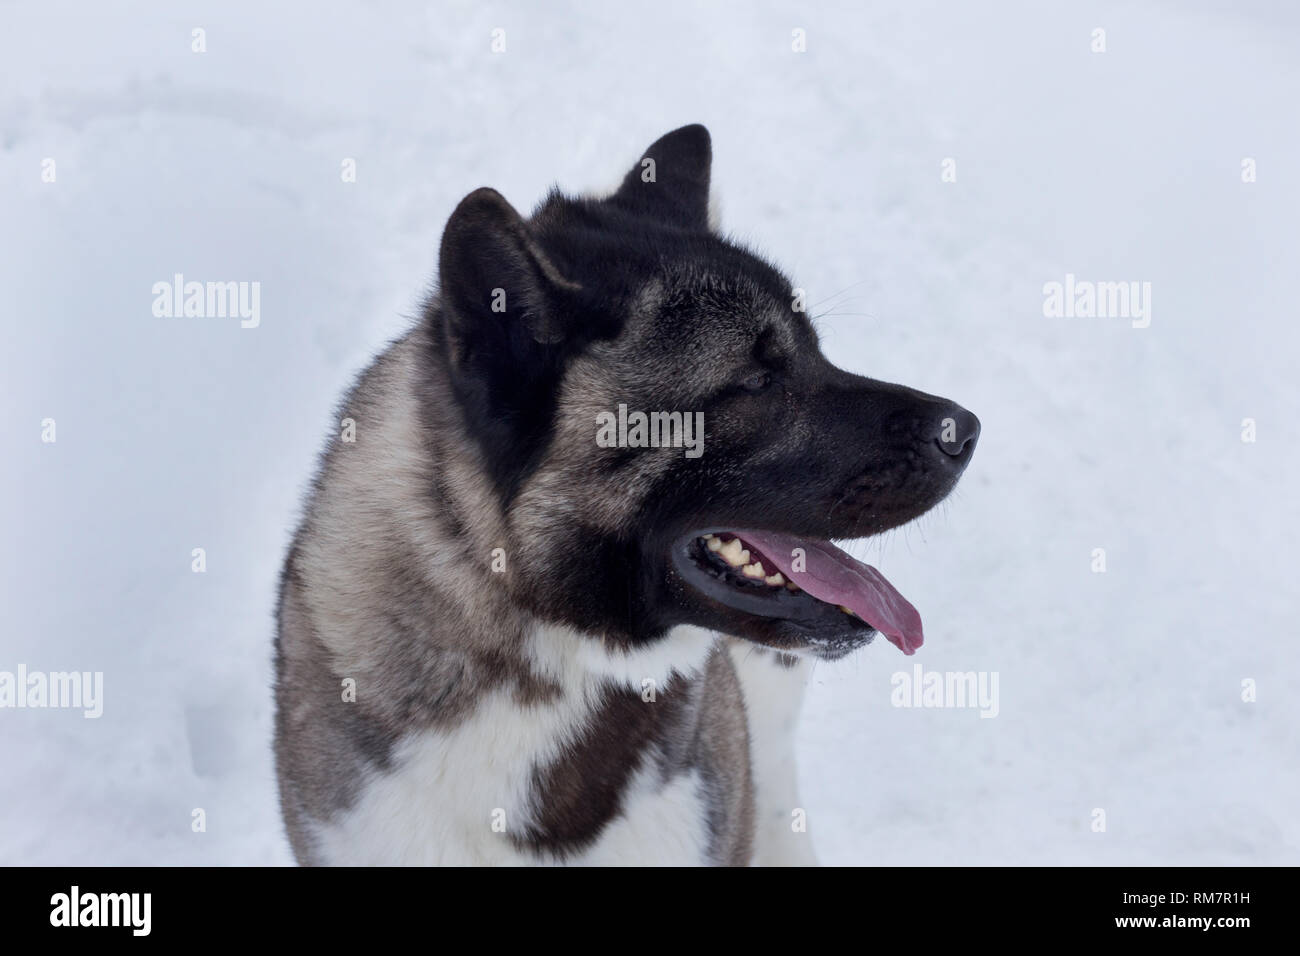 Cute american akita is standing on a white snow. Great japanese dog. Pet animals. Purebred dog. Stock Photo